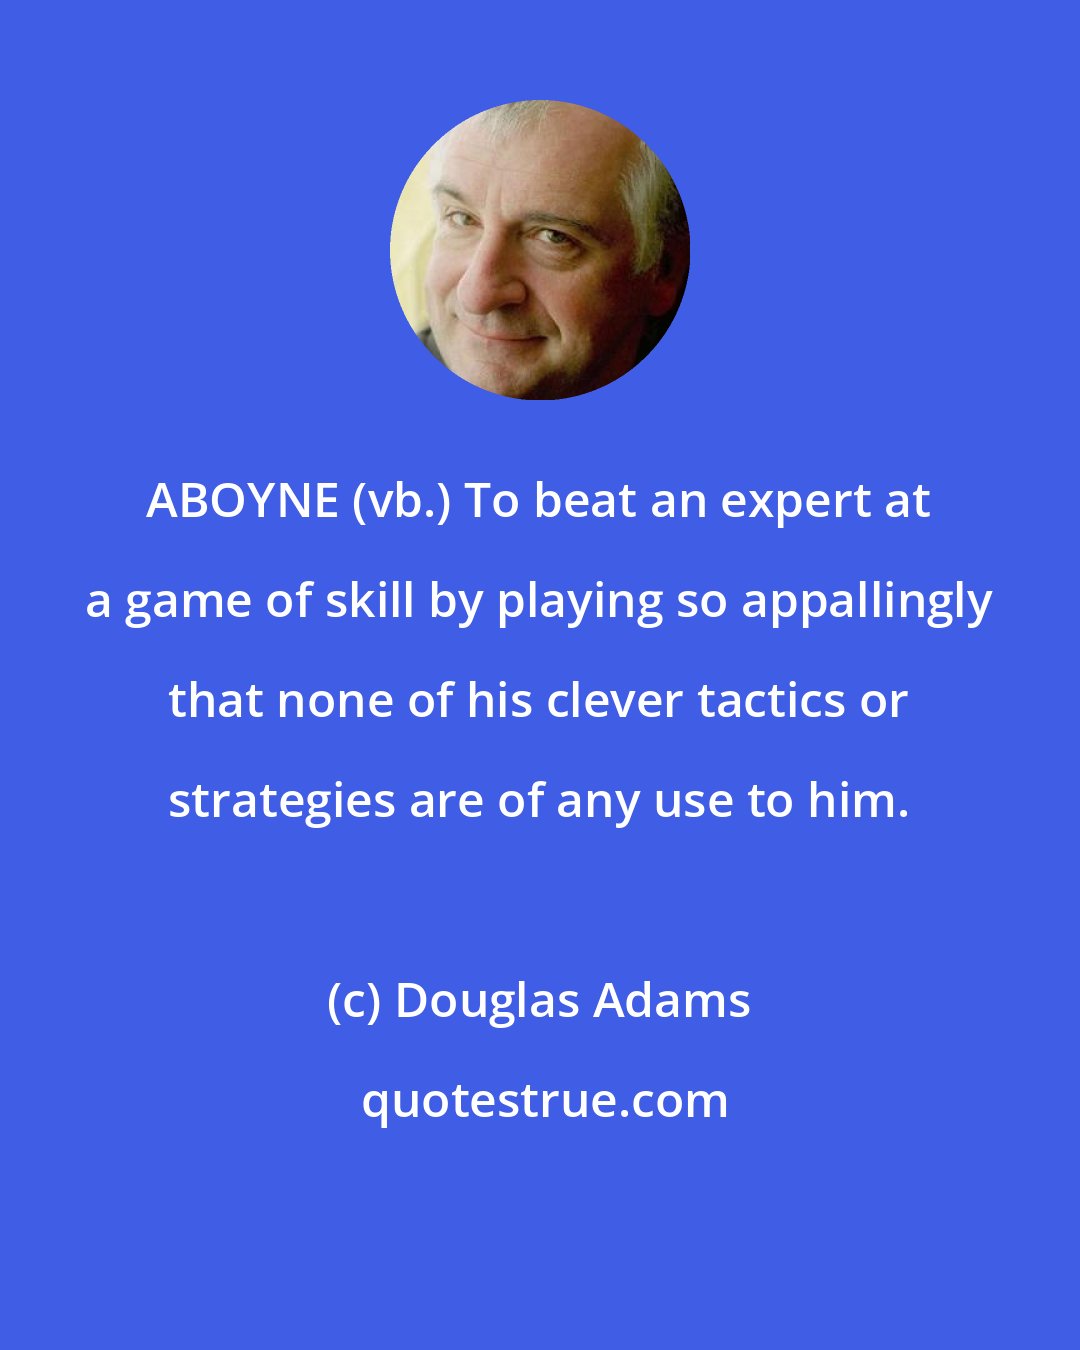 Douglas Adams: ABOYNE (vb.) To beat an expert at a game of skill by playing so appallingly that none of his clever tactics or strategies are of any use to him.